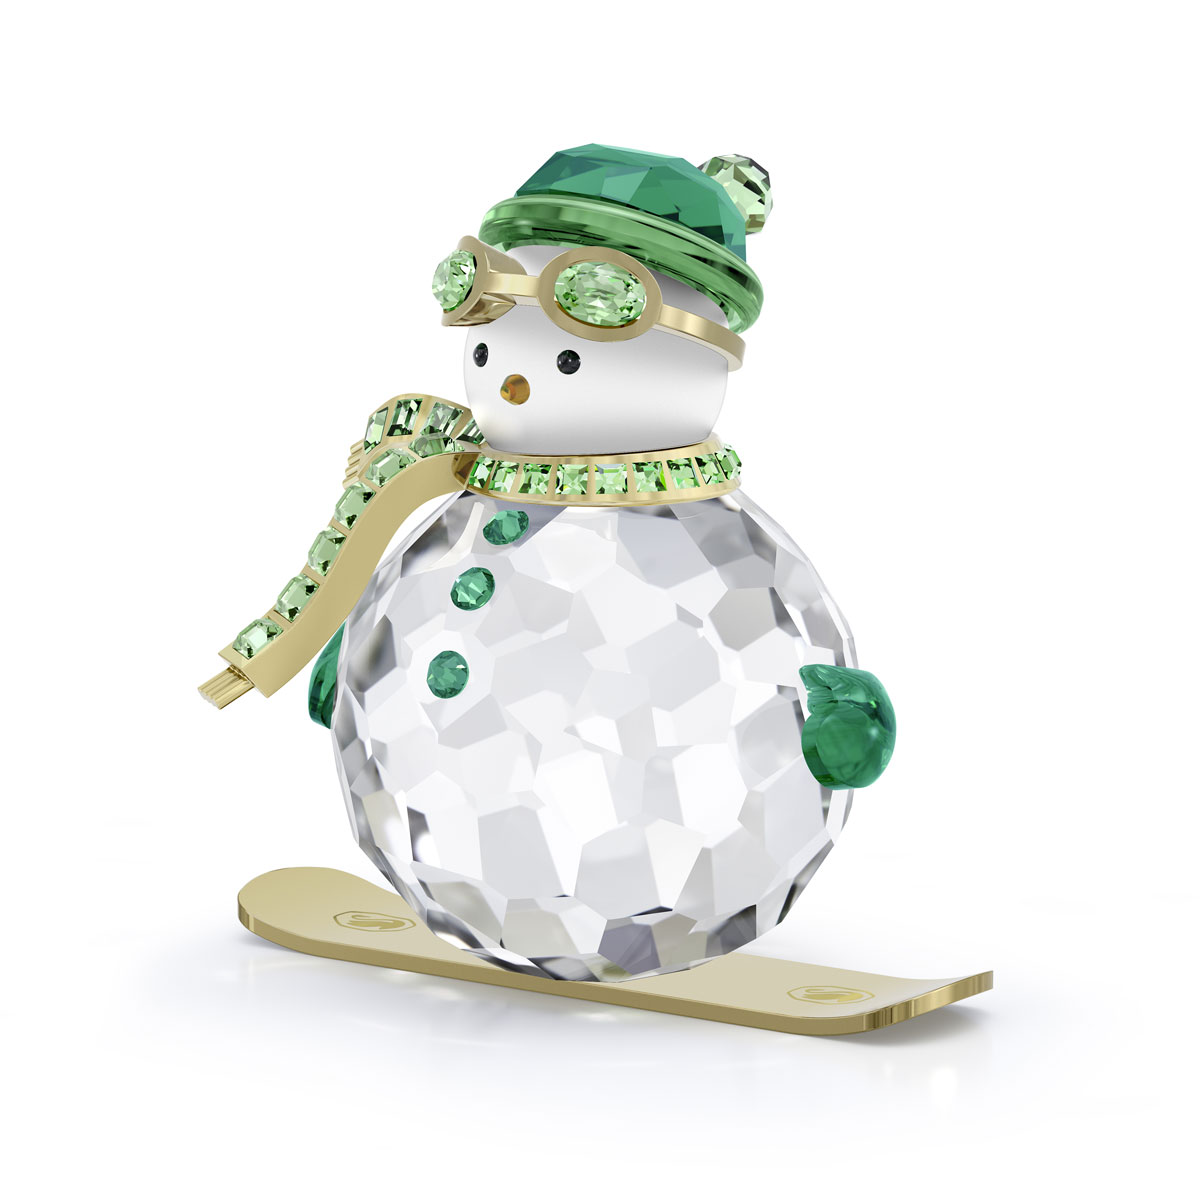 Swarovski Holiday Cheers Dulcis Snowman with Green Accents on Snowboard